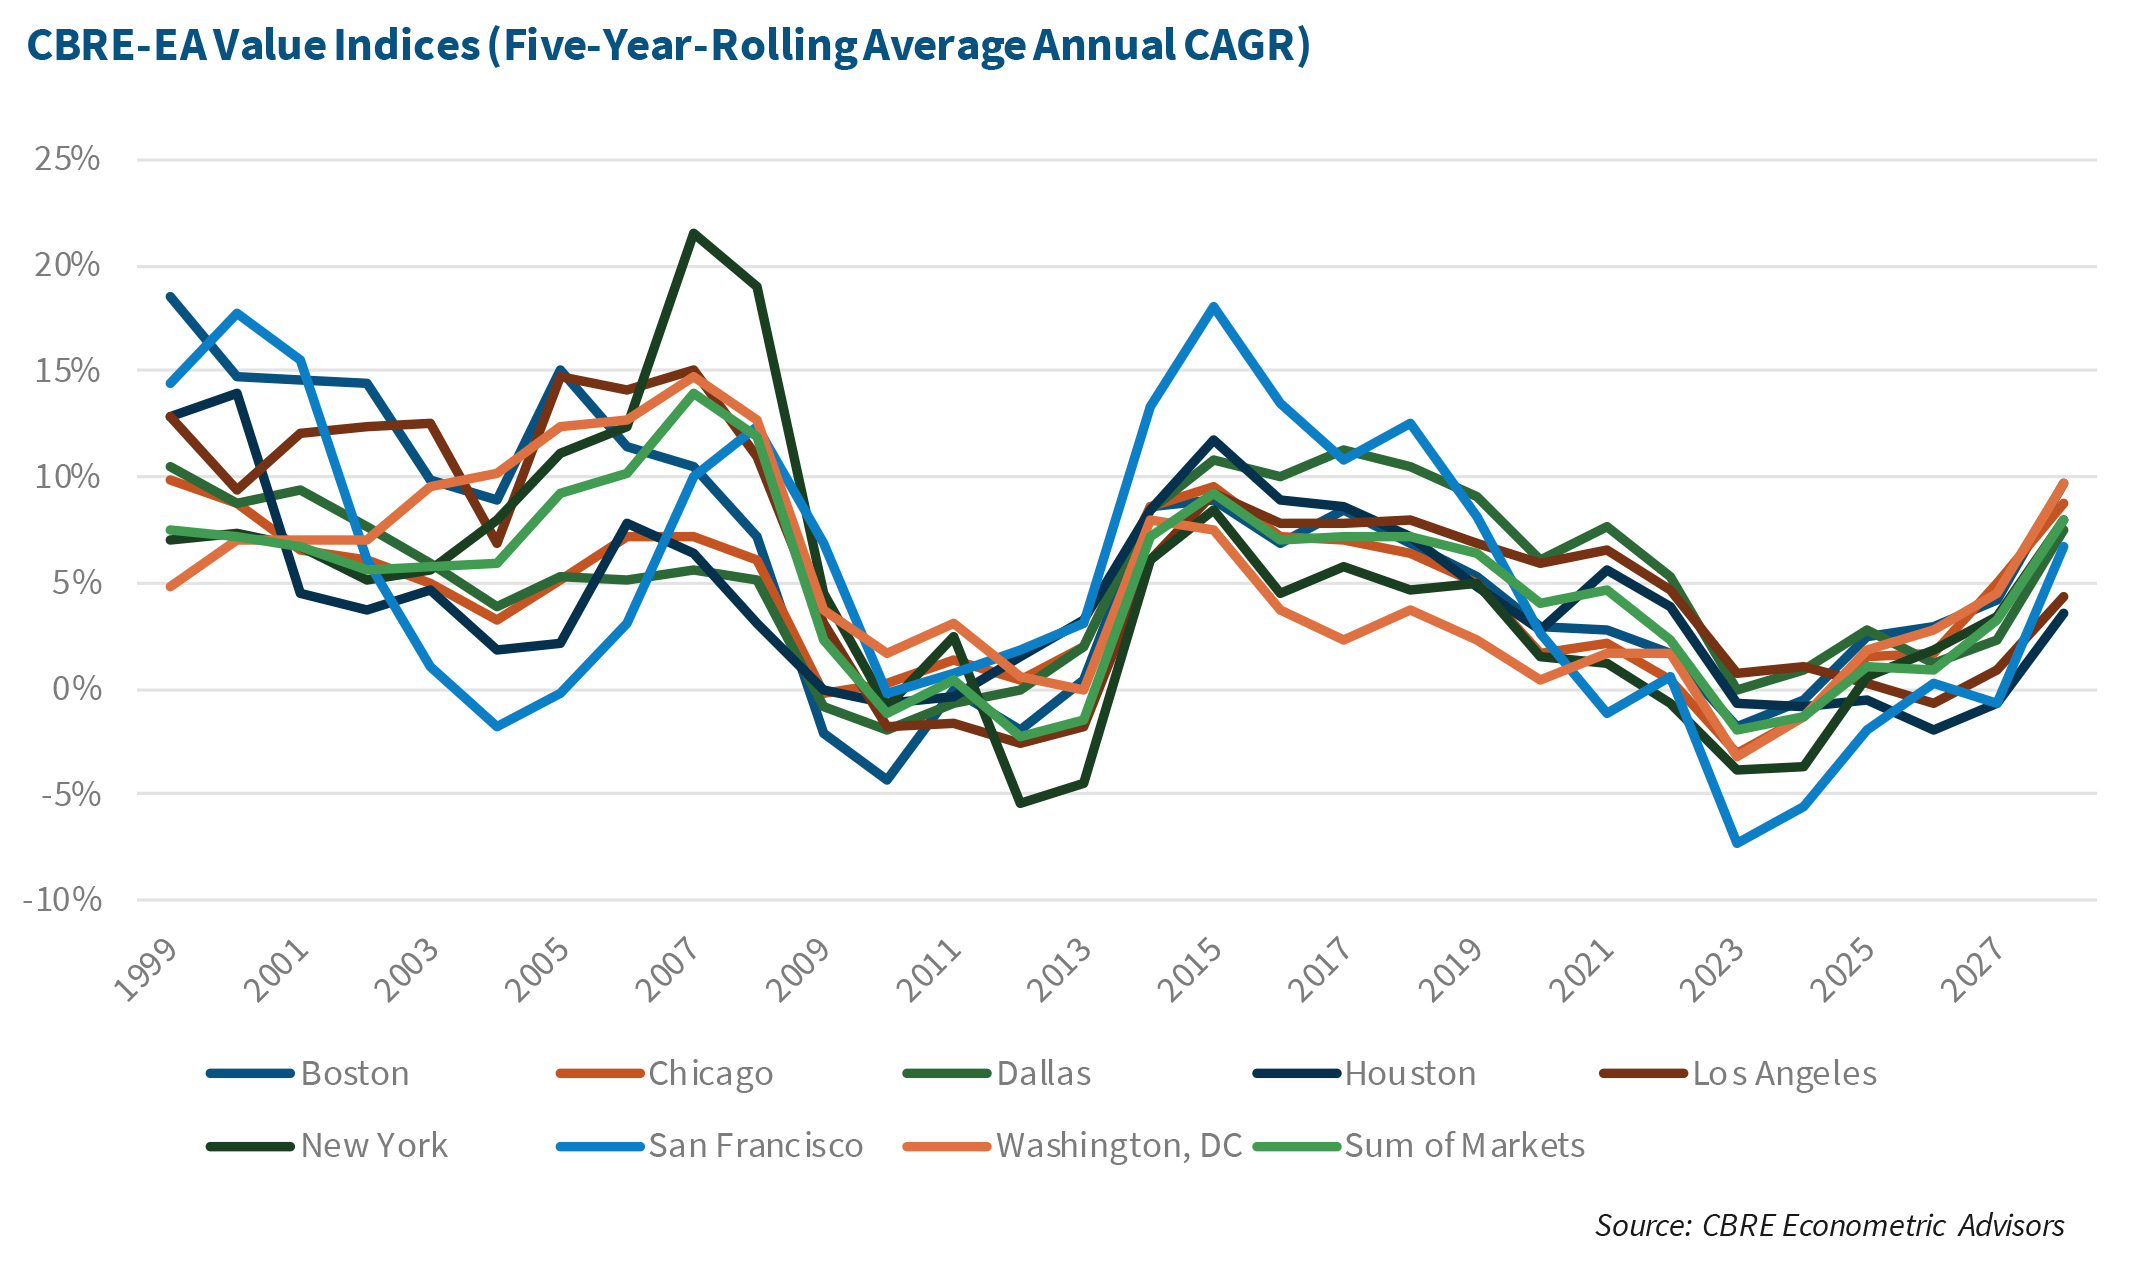 CBRE-EA Value Indices (Five-Year-Rolling Average Annual CAGR)